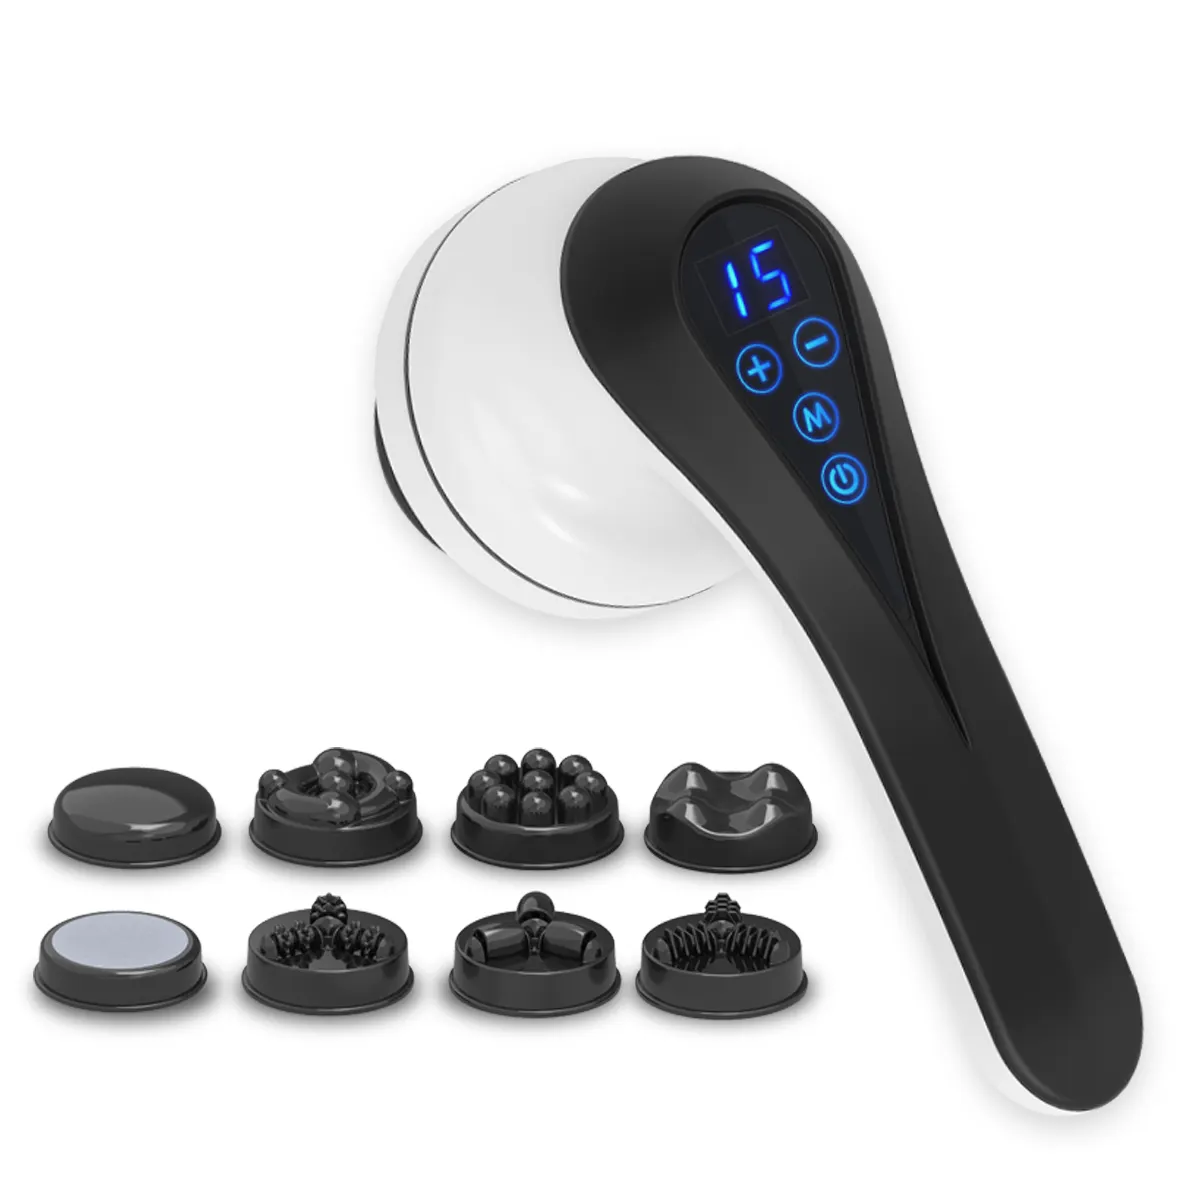 PL-665 Ekang Touch Screen HandHeld Cordless Vibrating Personal Body Elimina Cellulite Innovation Massager